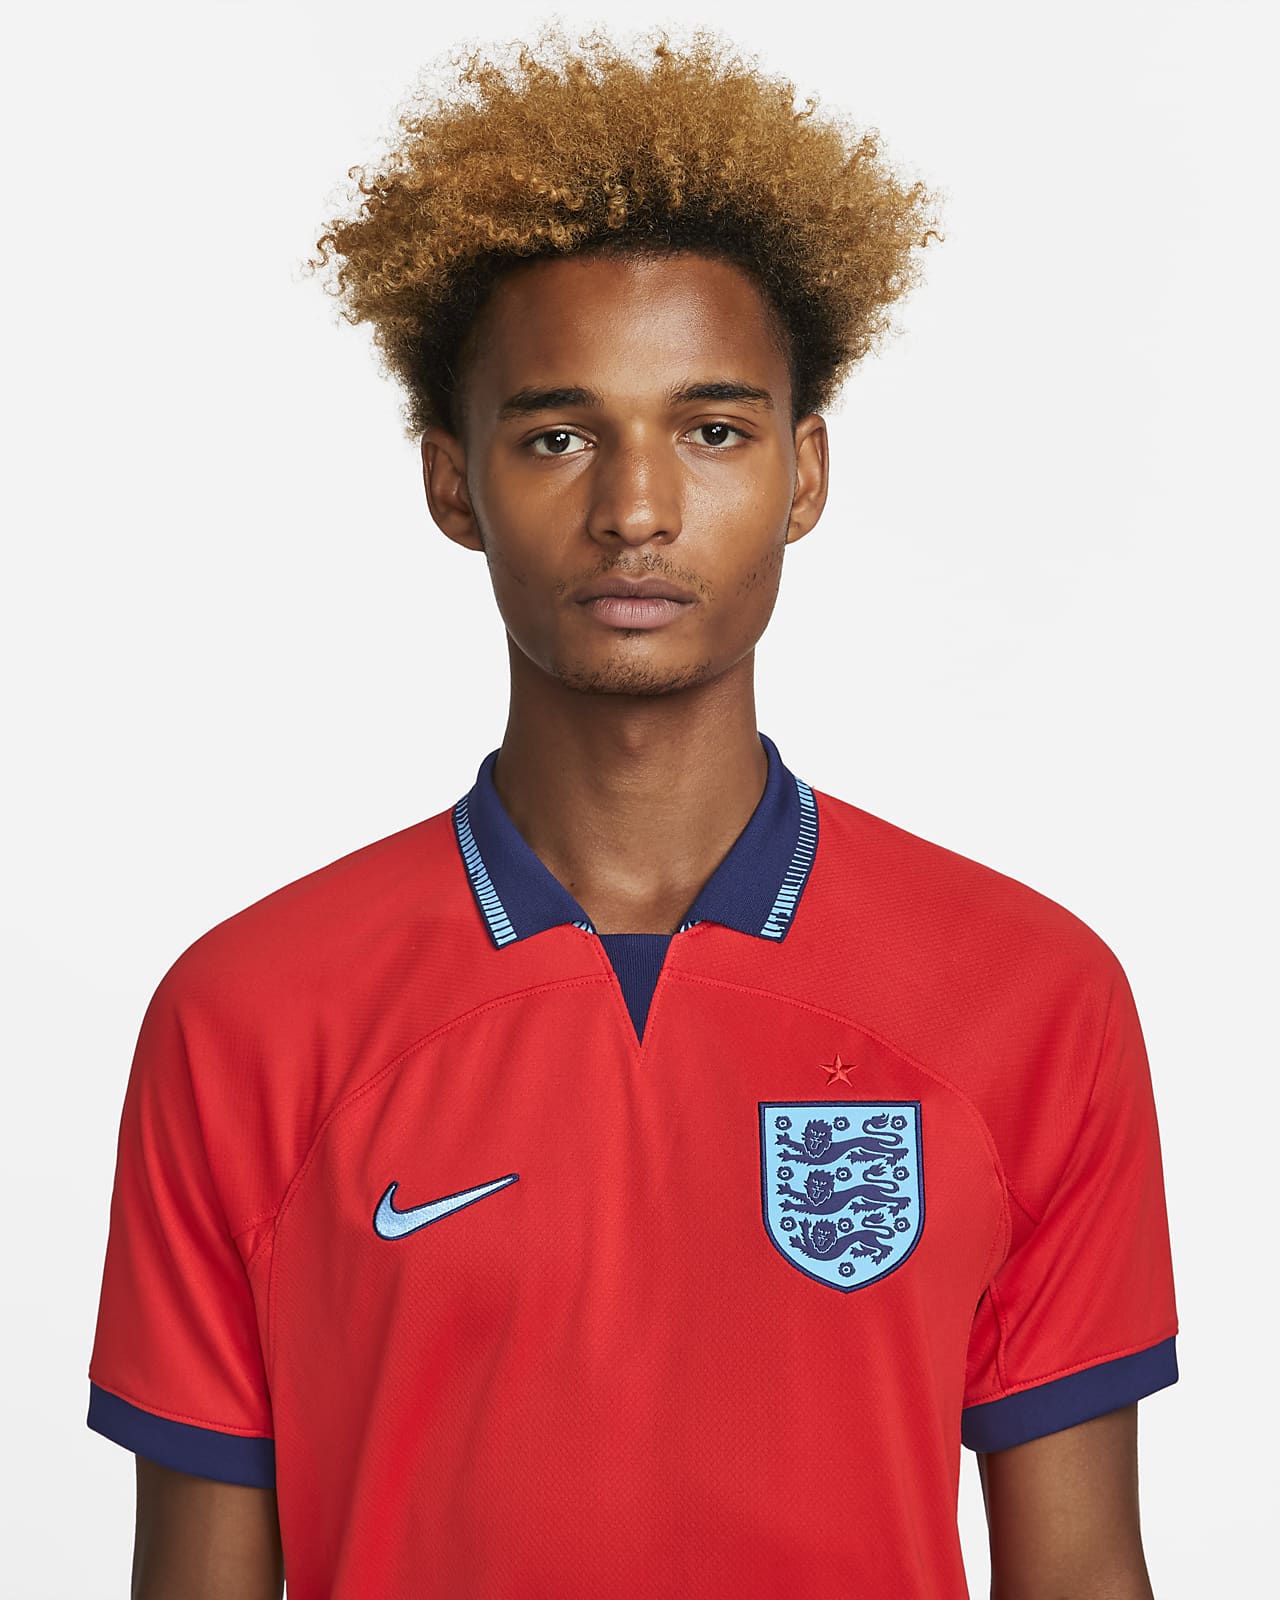 Maillot England 2022/23 Stadium Away pour Homme - DN0685-600